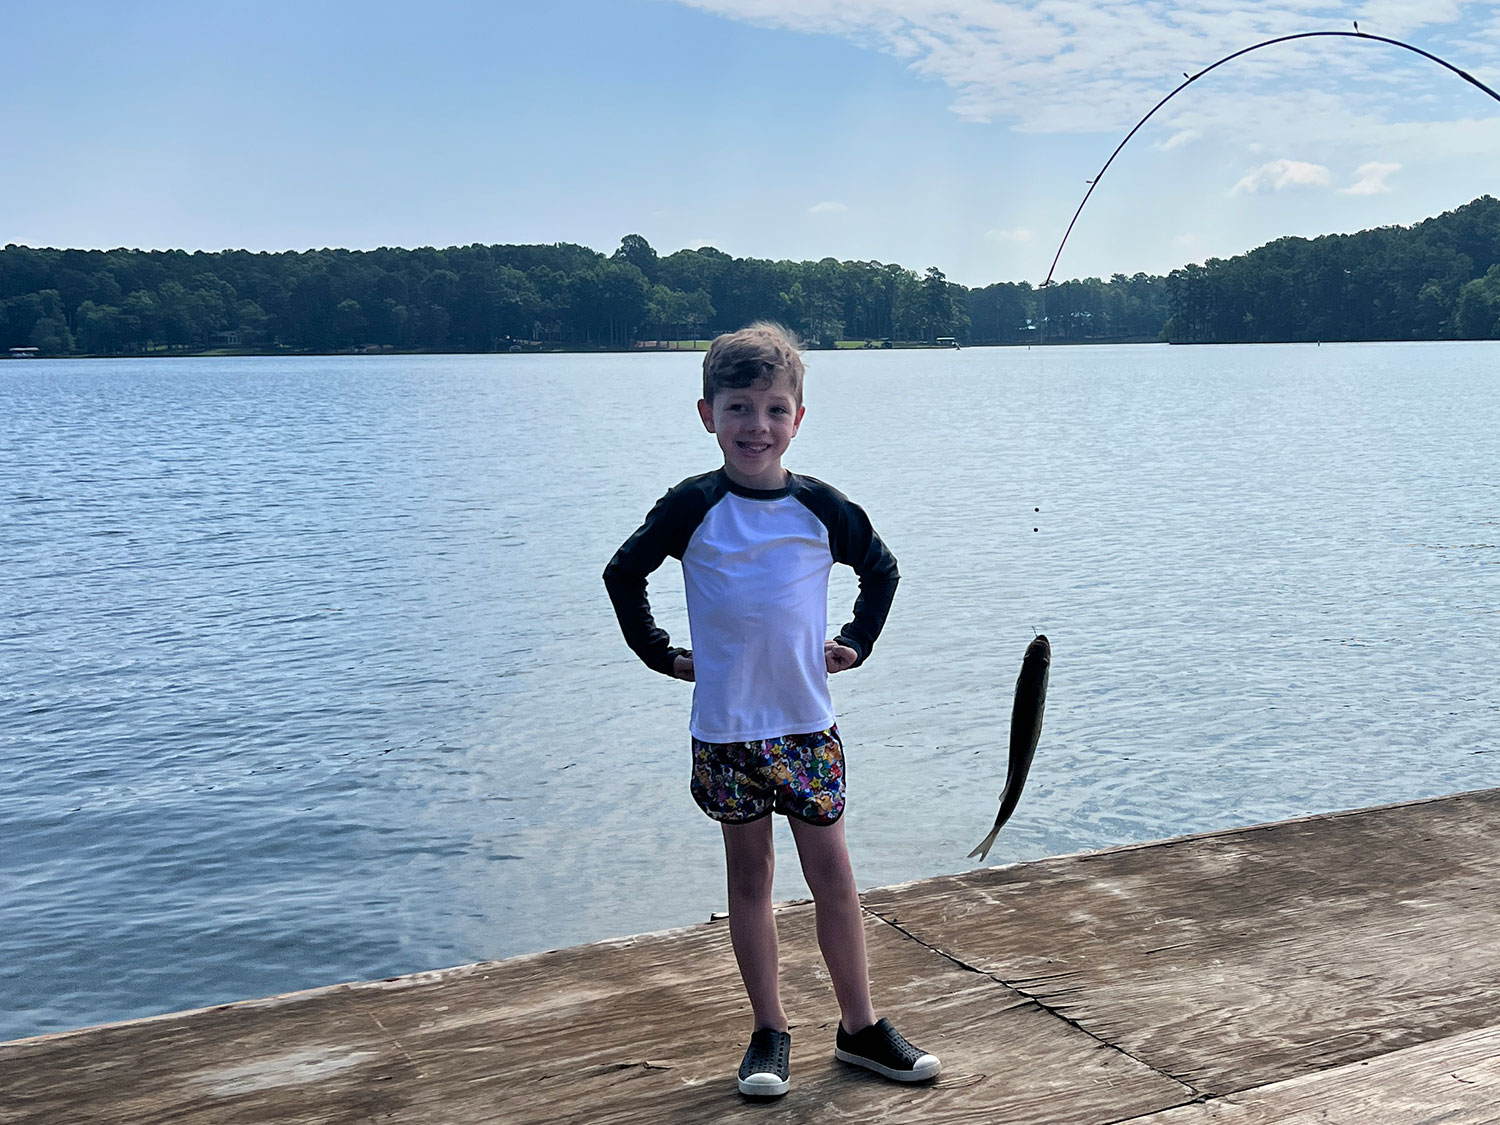 A child shows off the fish he caught at Reynolds Lake Oconee in Georgia.